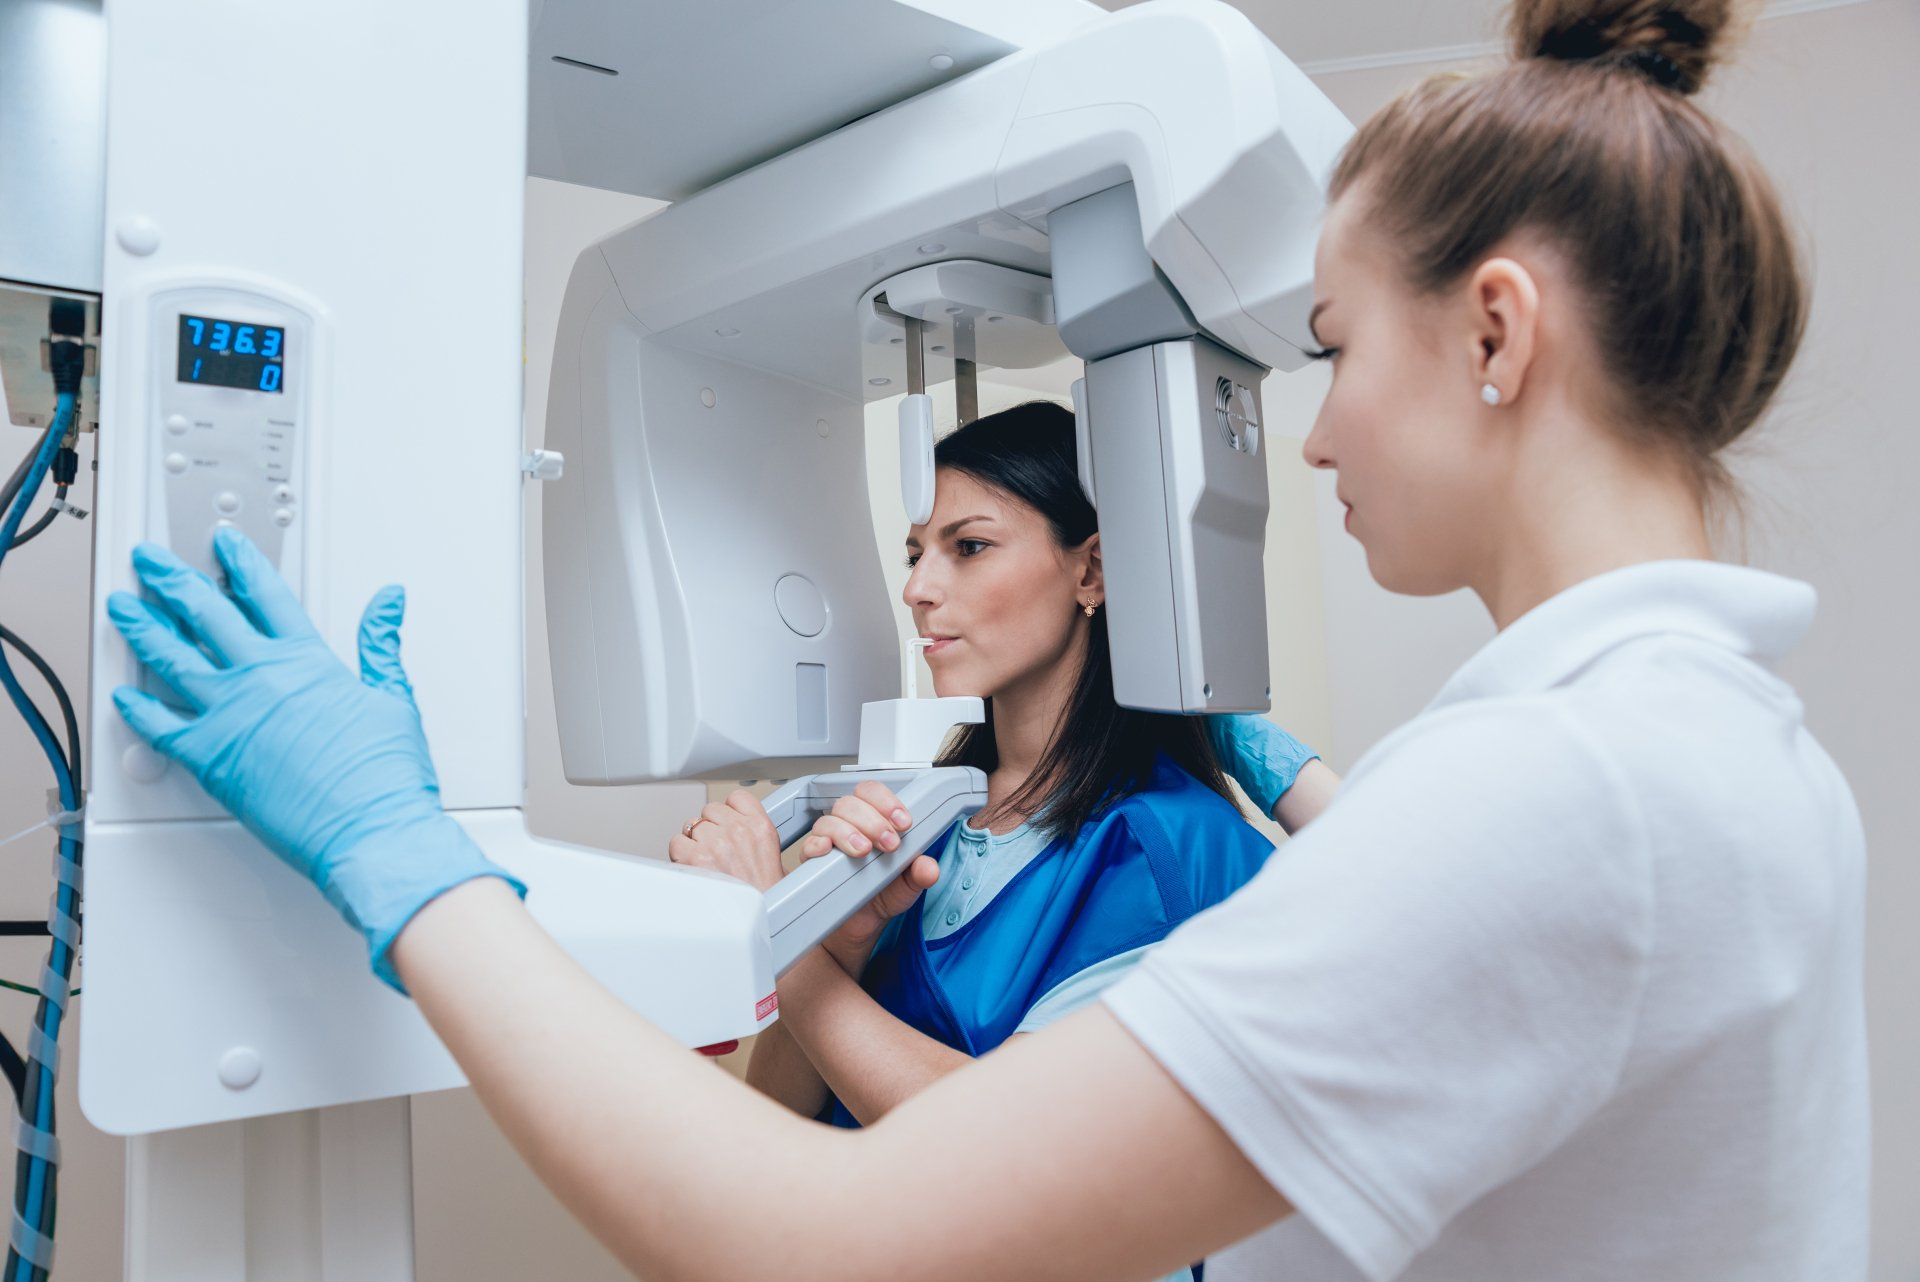 Dental technology | x ray machine | dentist near you | female patient getting an x ray | Total Dental Care of South Carolina | Dentist In Columbia, South Carolina